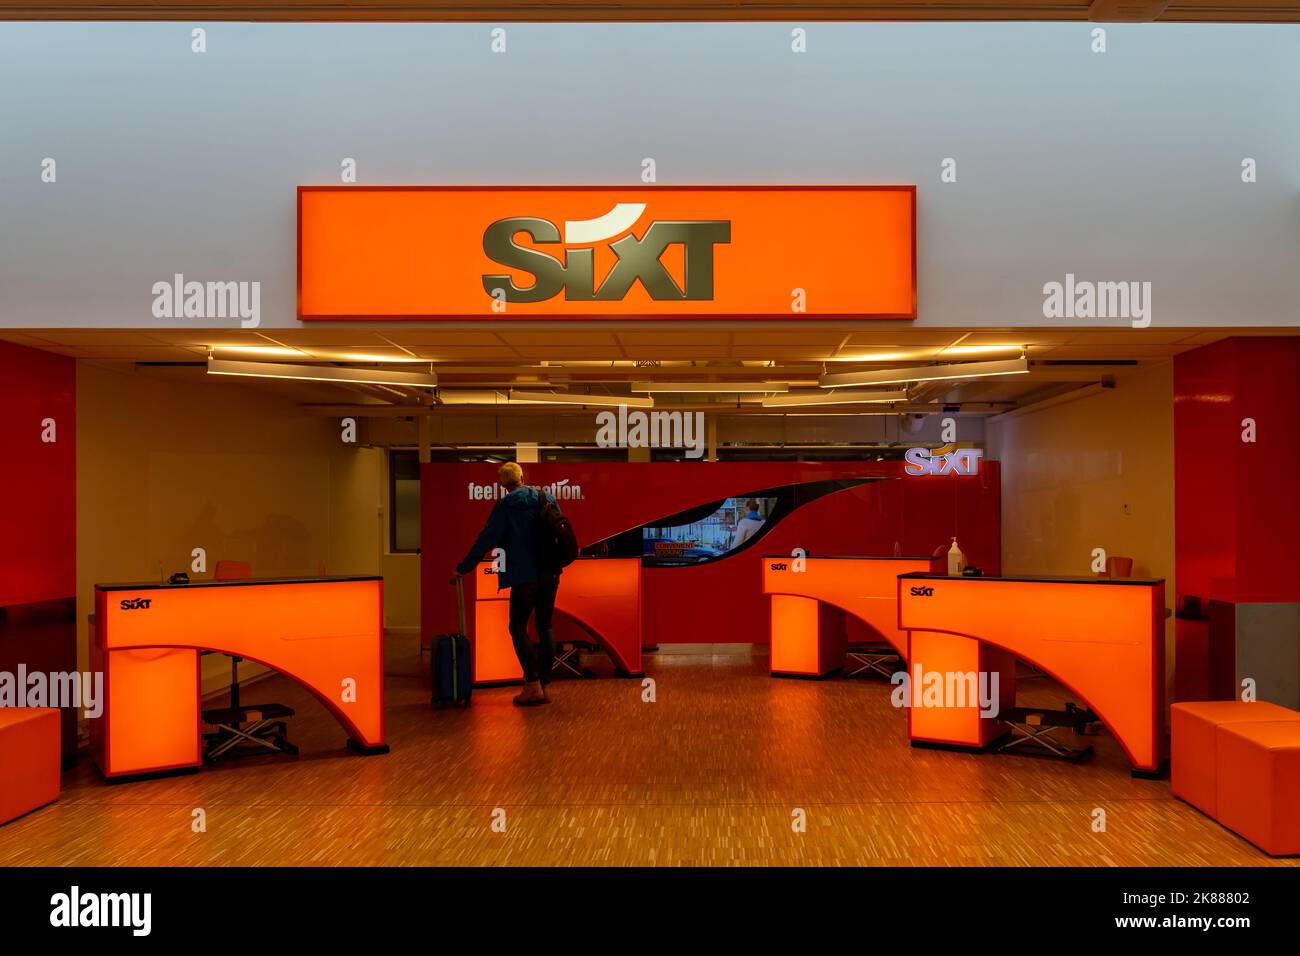 Oslo, Norway - September 28, 2022: A Sixt car rental counter at the airport. Stock Photo